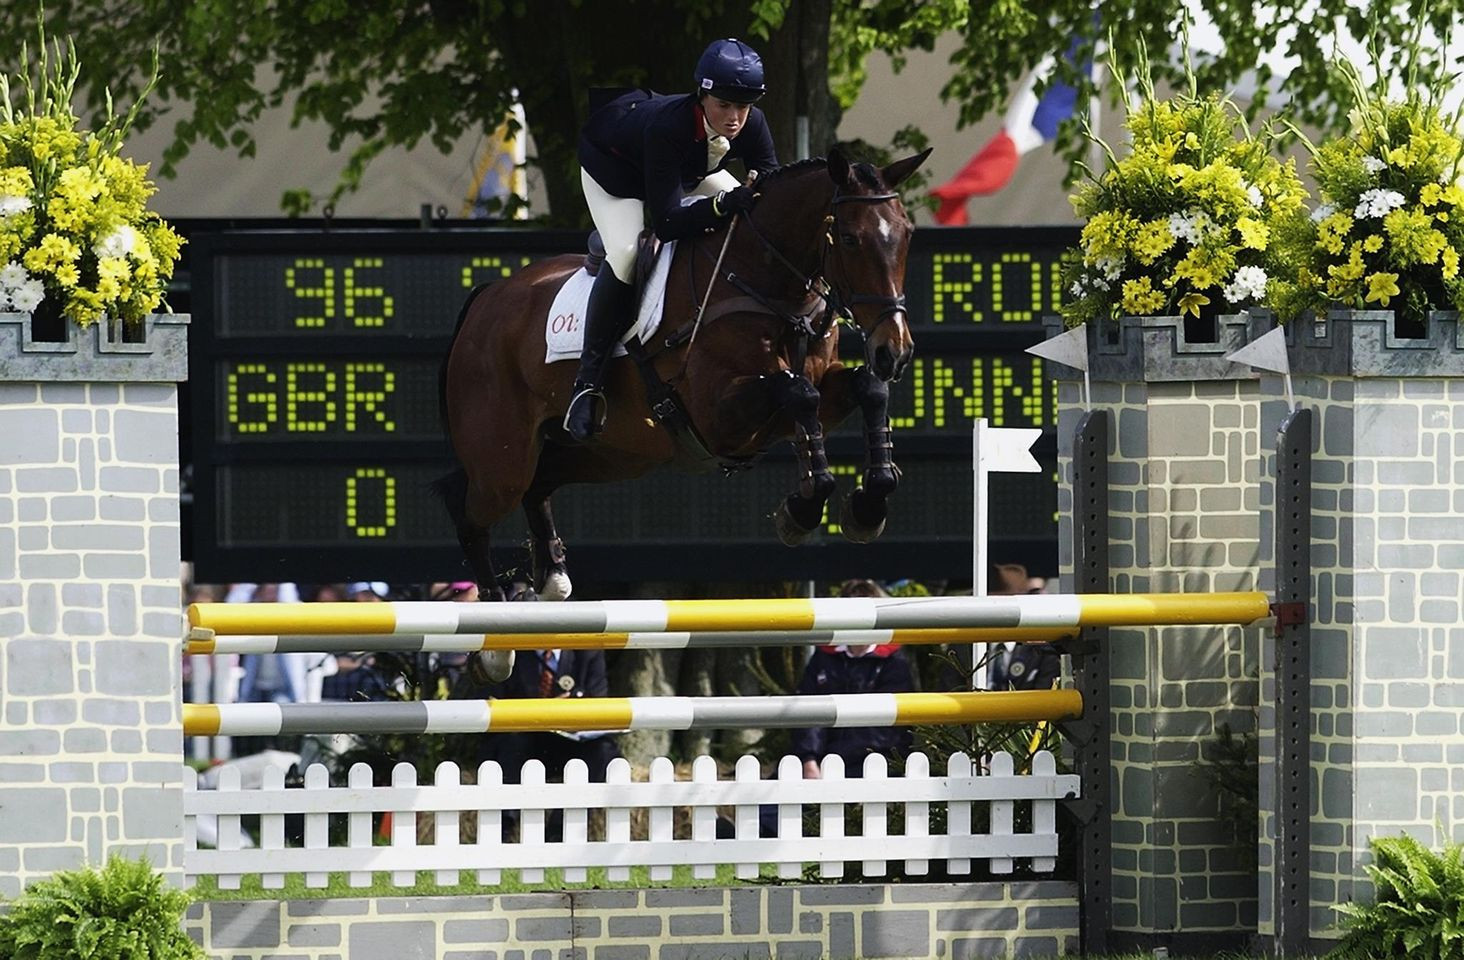 Britain's Pippa Funnell is one of only two riders to have completed the Grand Slam of Eventing, which includes the Kentucky Three-Day Event ©Getty Images